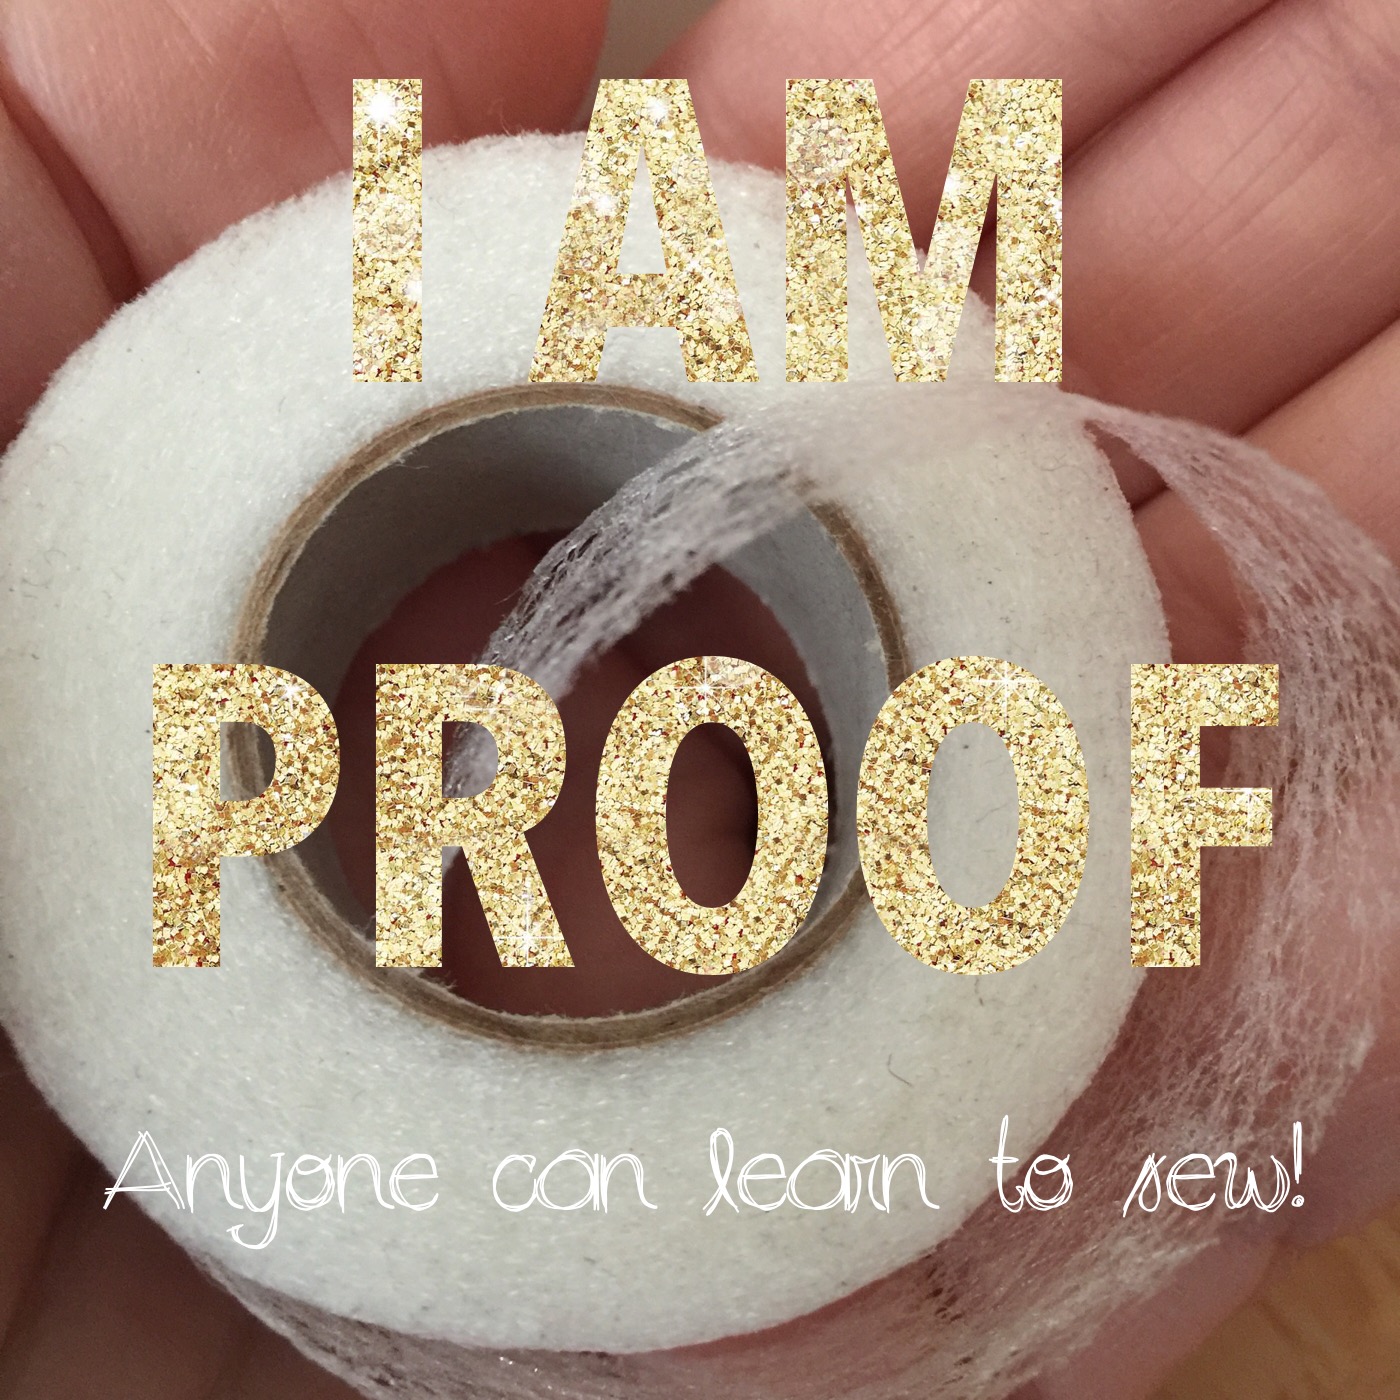 I am proof anyone can learn to sew!